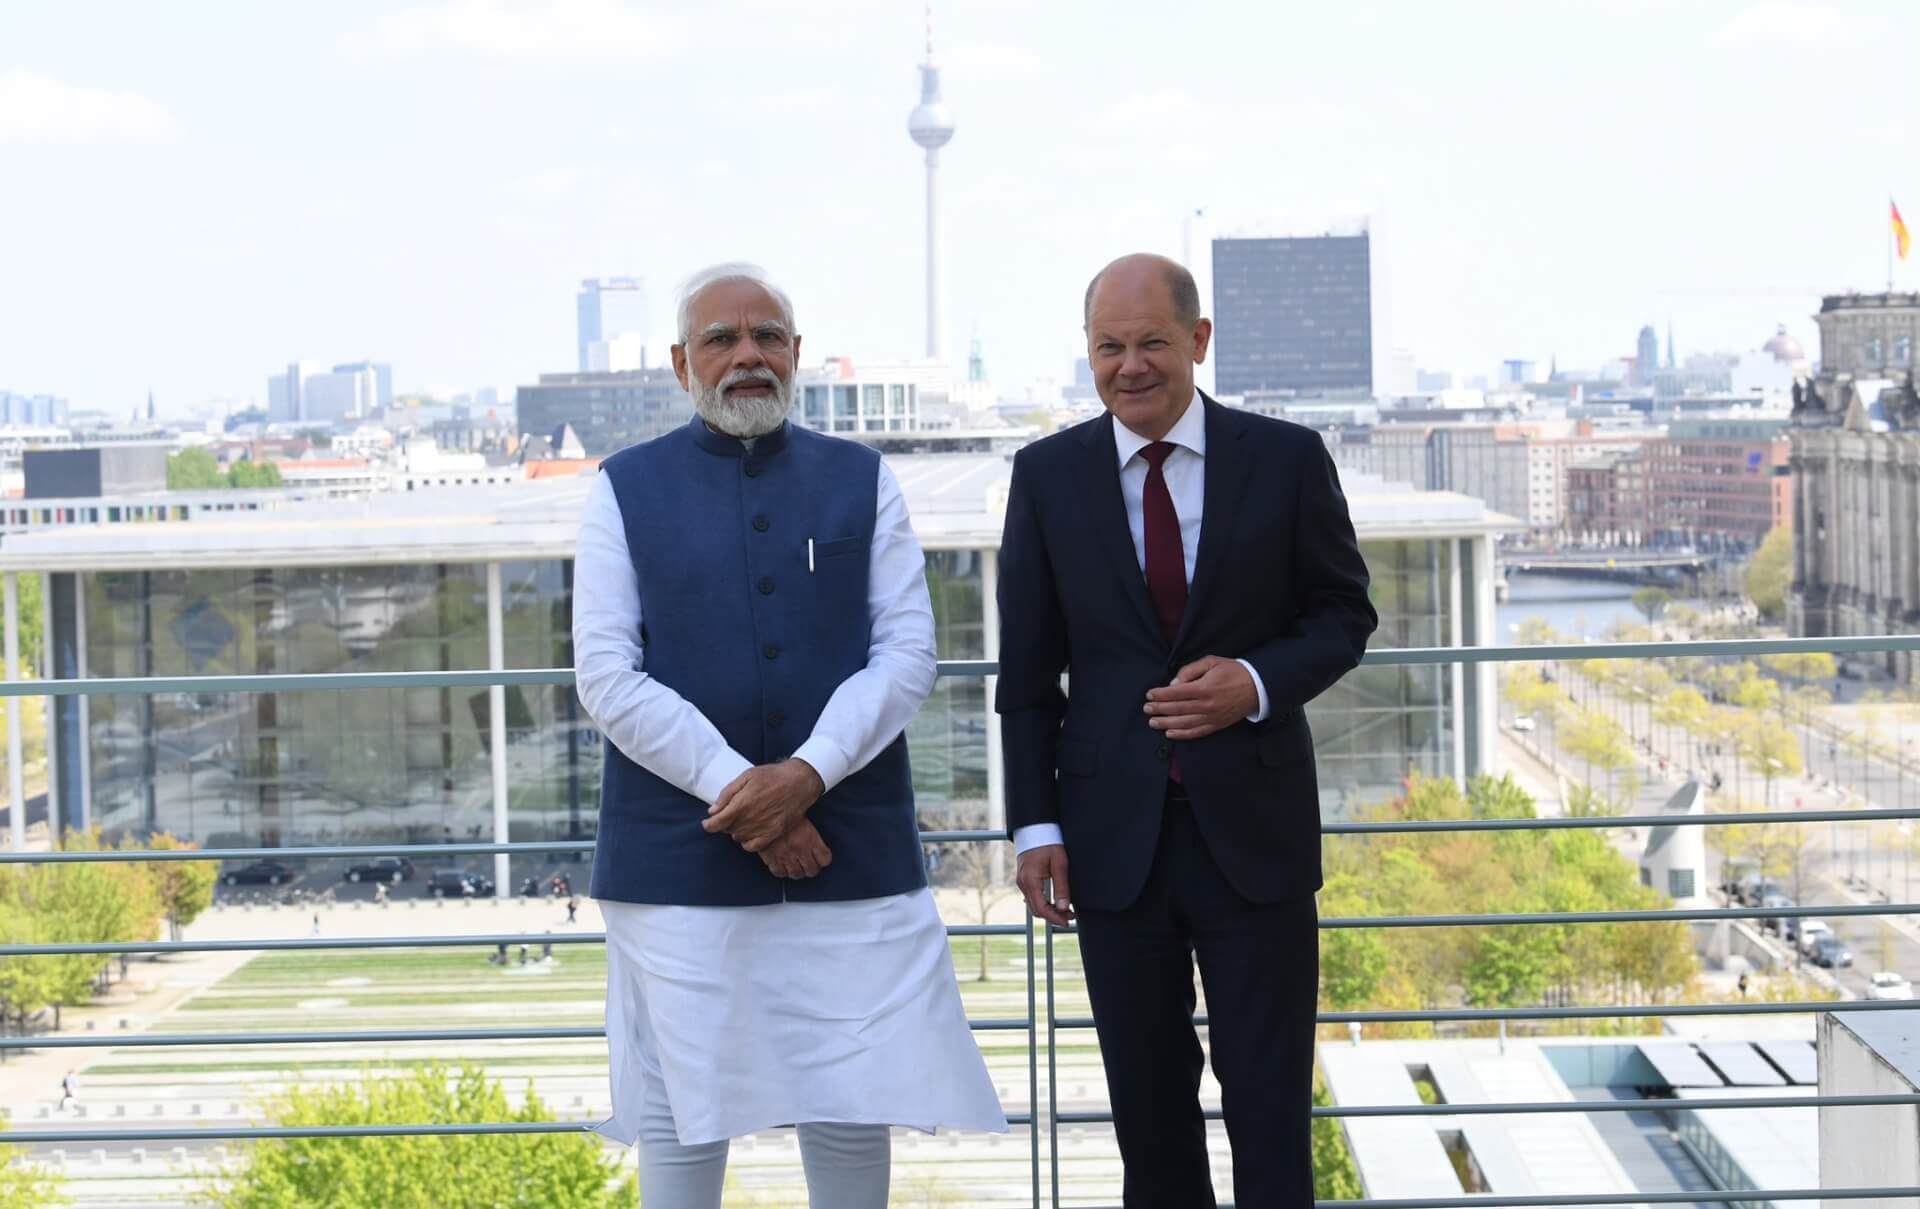 Modi Says Ukraine War to Have “No Winners” But Refuses to Condemn Russia on Germany Visit